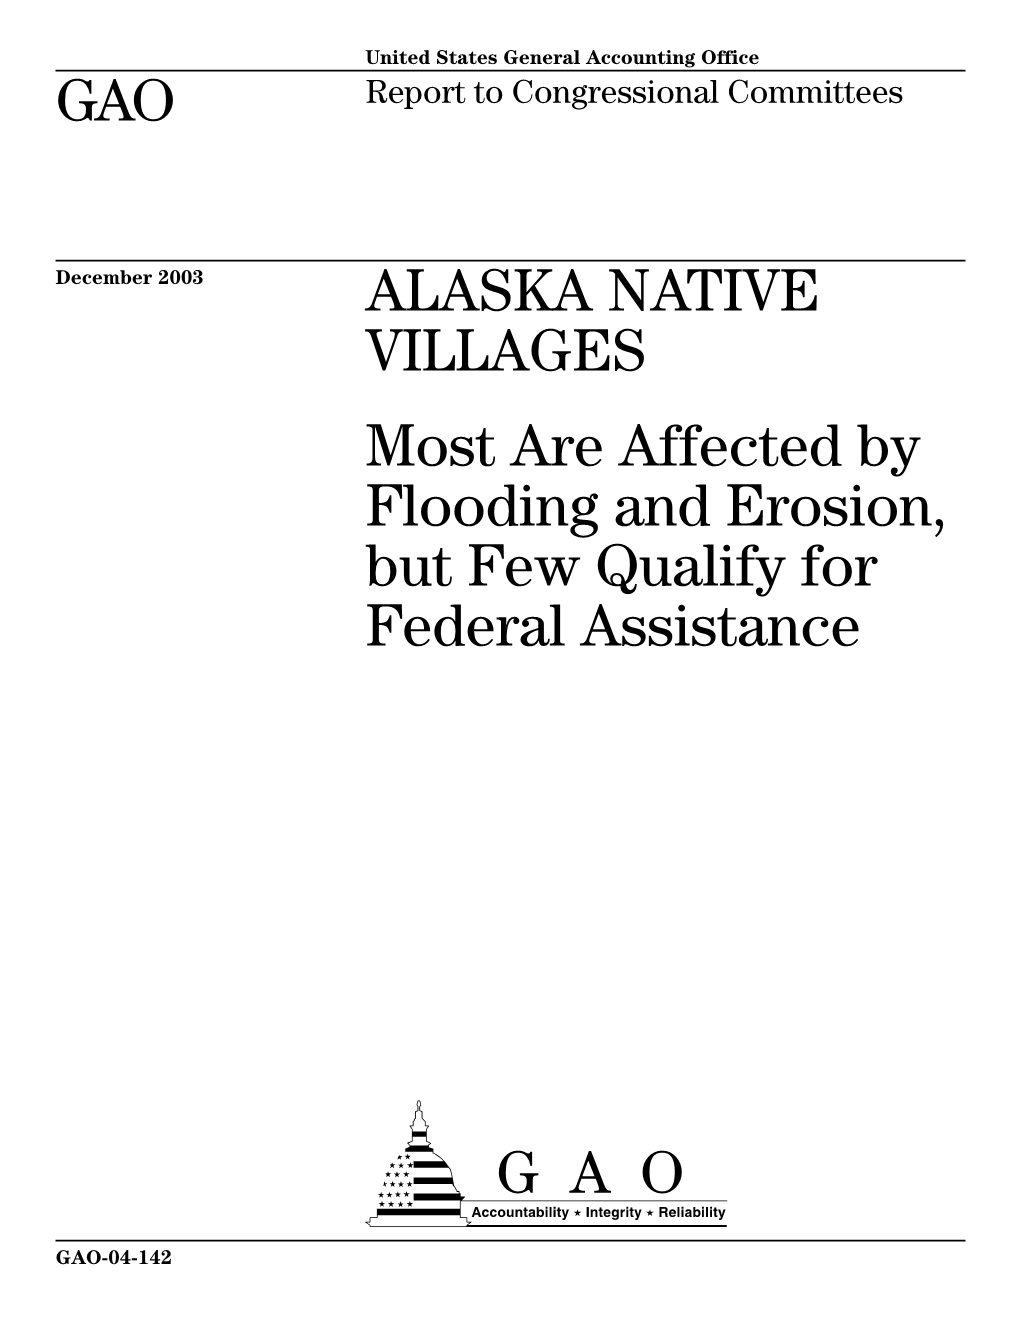 GAO-04-142 Alaska Native Villages: Most Are Affected by Flooding And